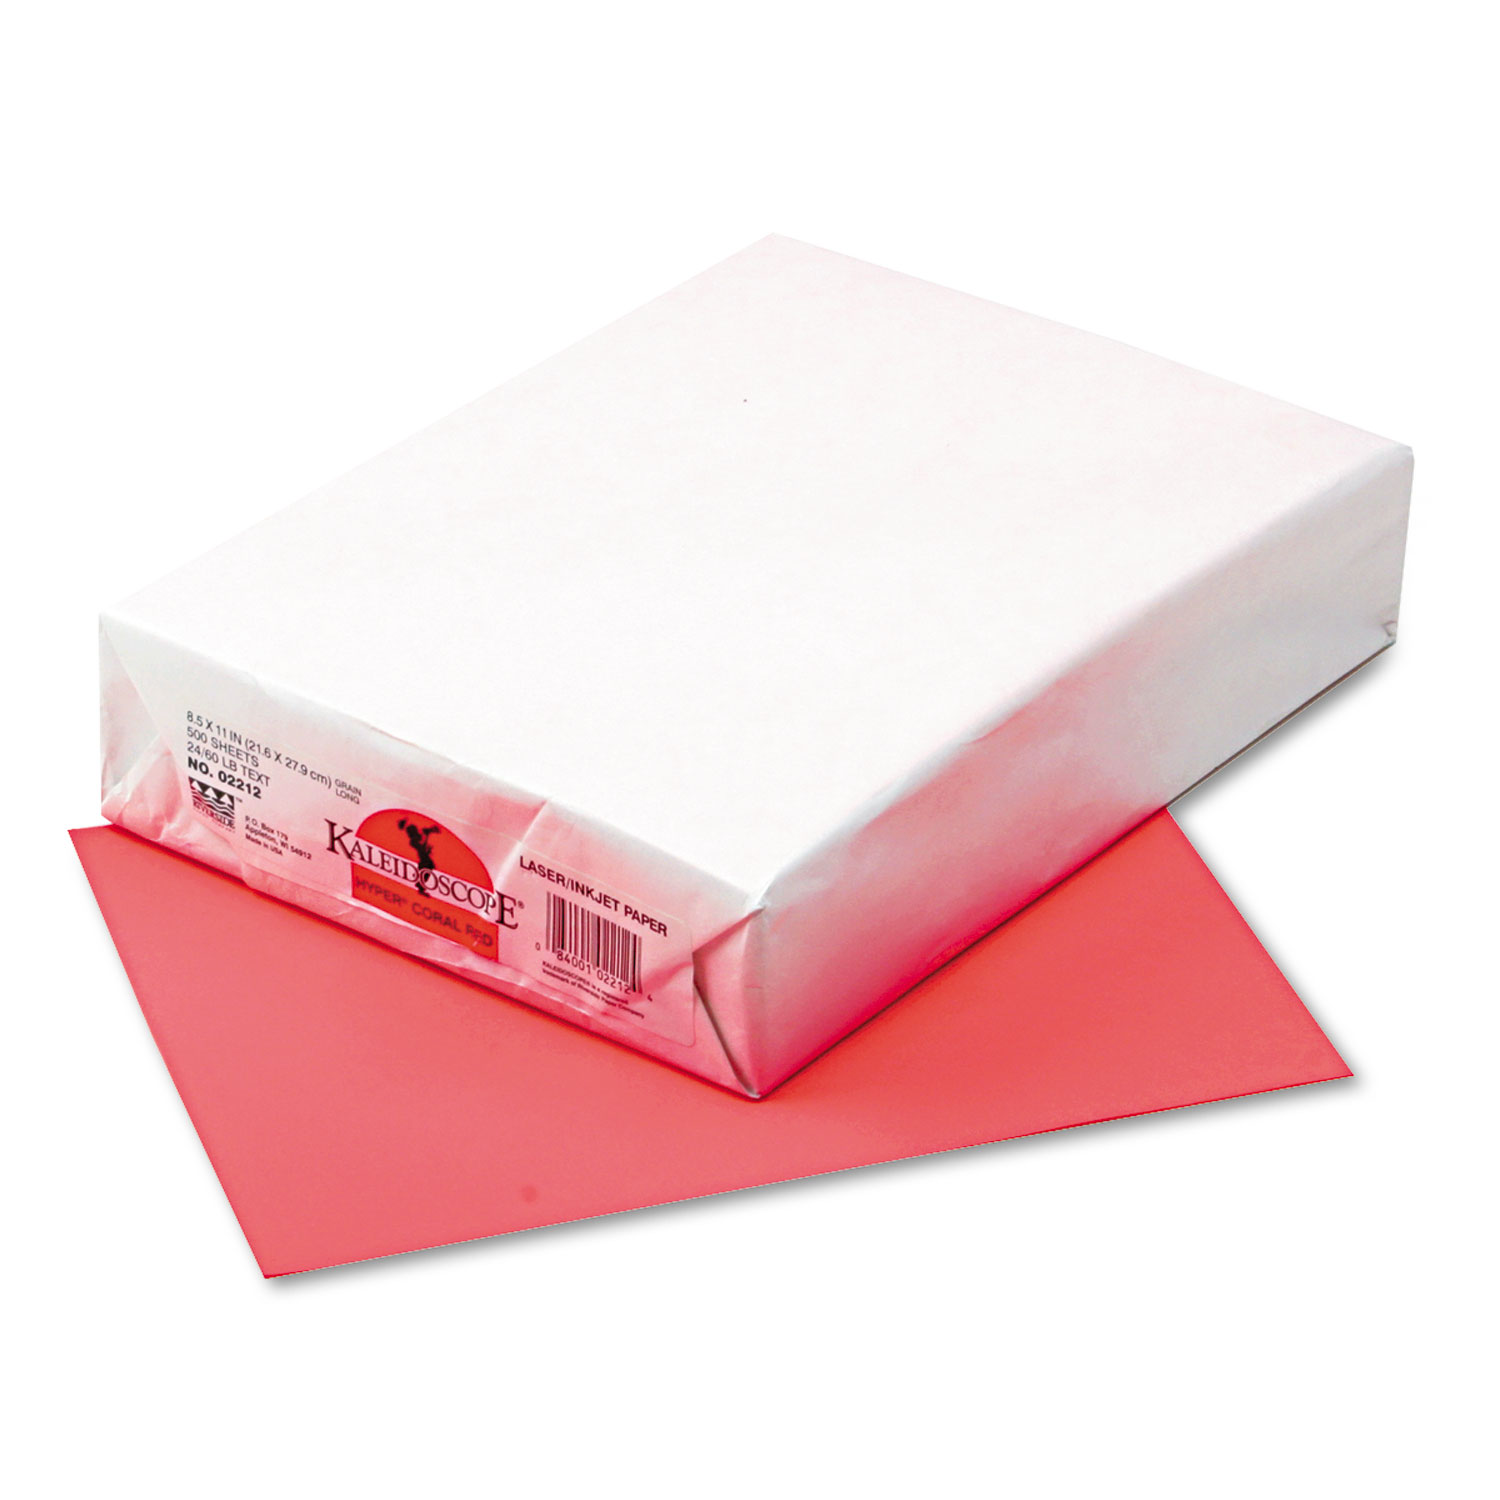  Pacon 102212 Kaleidoscope Multipurpose Paper, 24lb, 8.5 x 11, Hyper Coral Red, 500/Ream (PAC102212) 